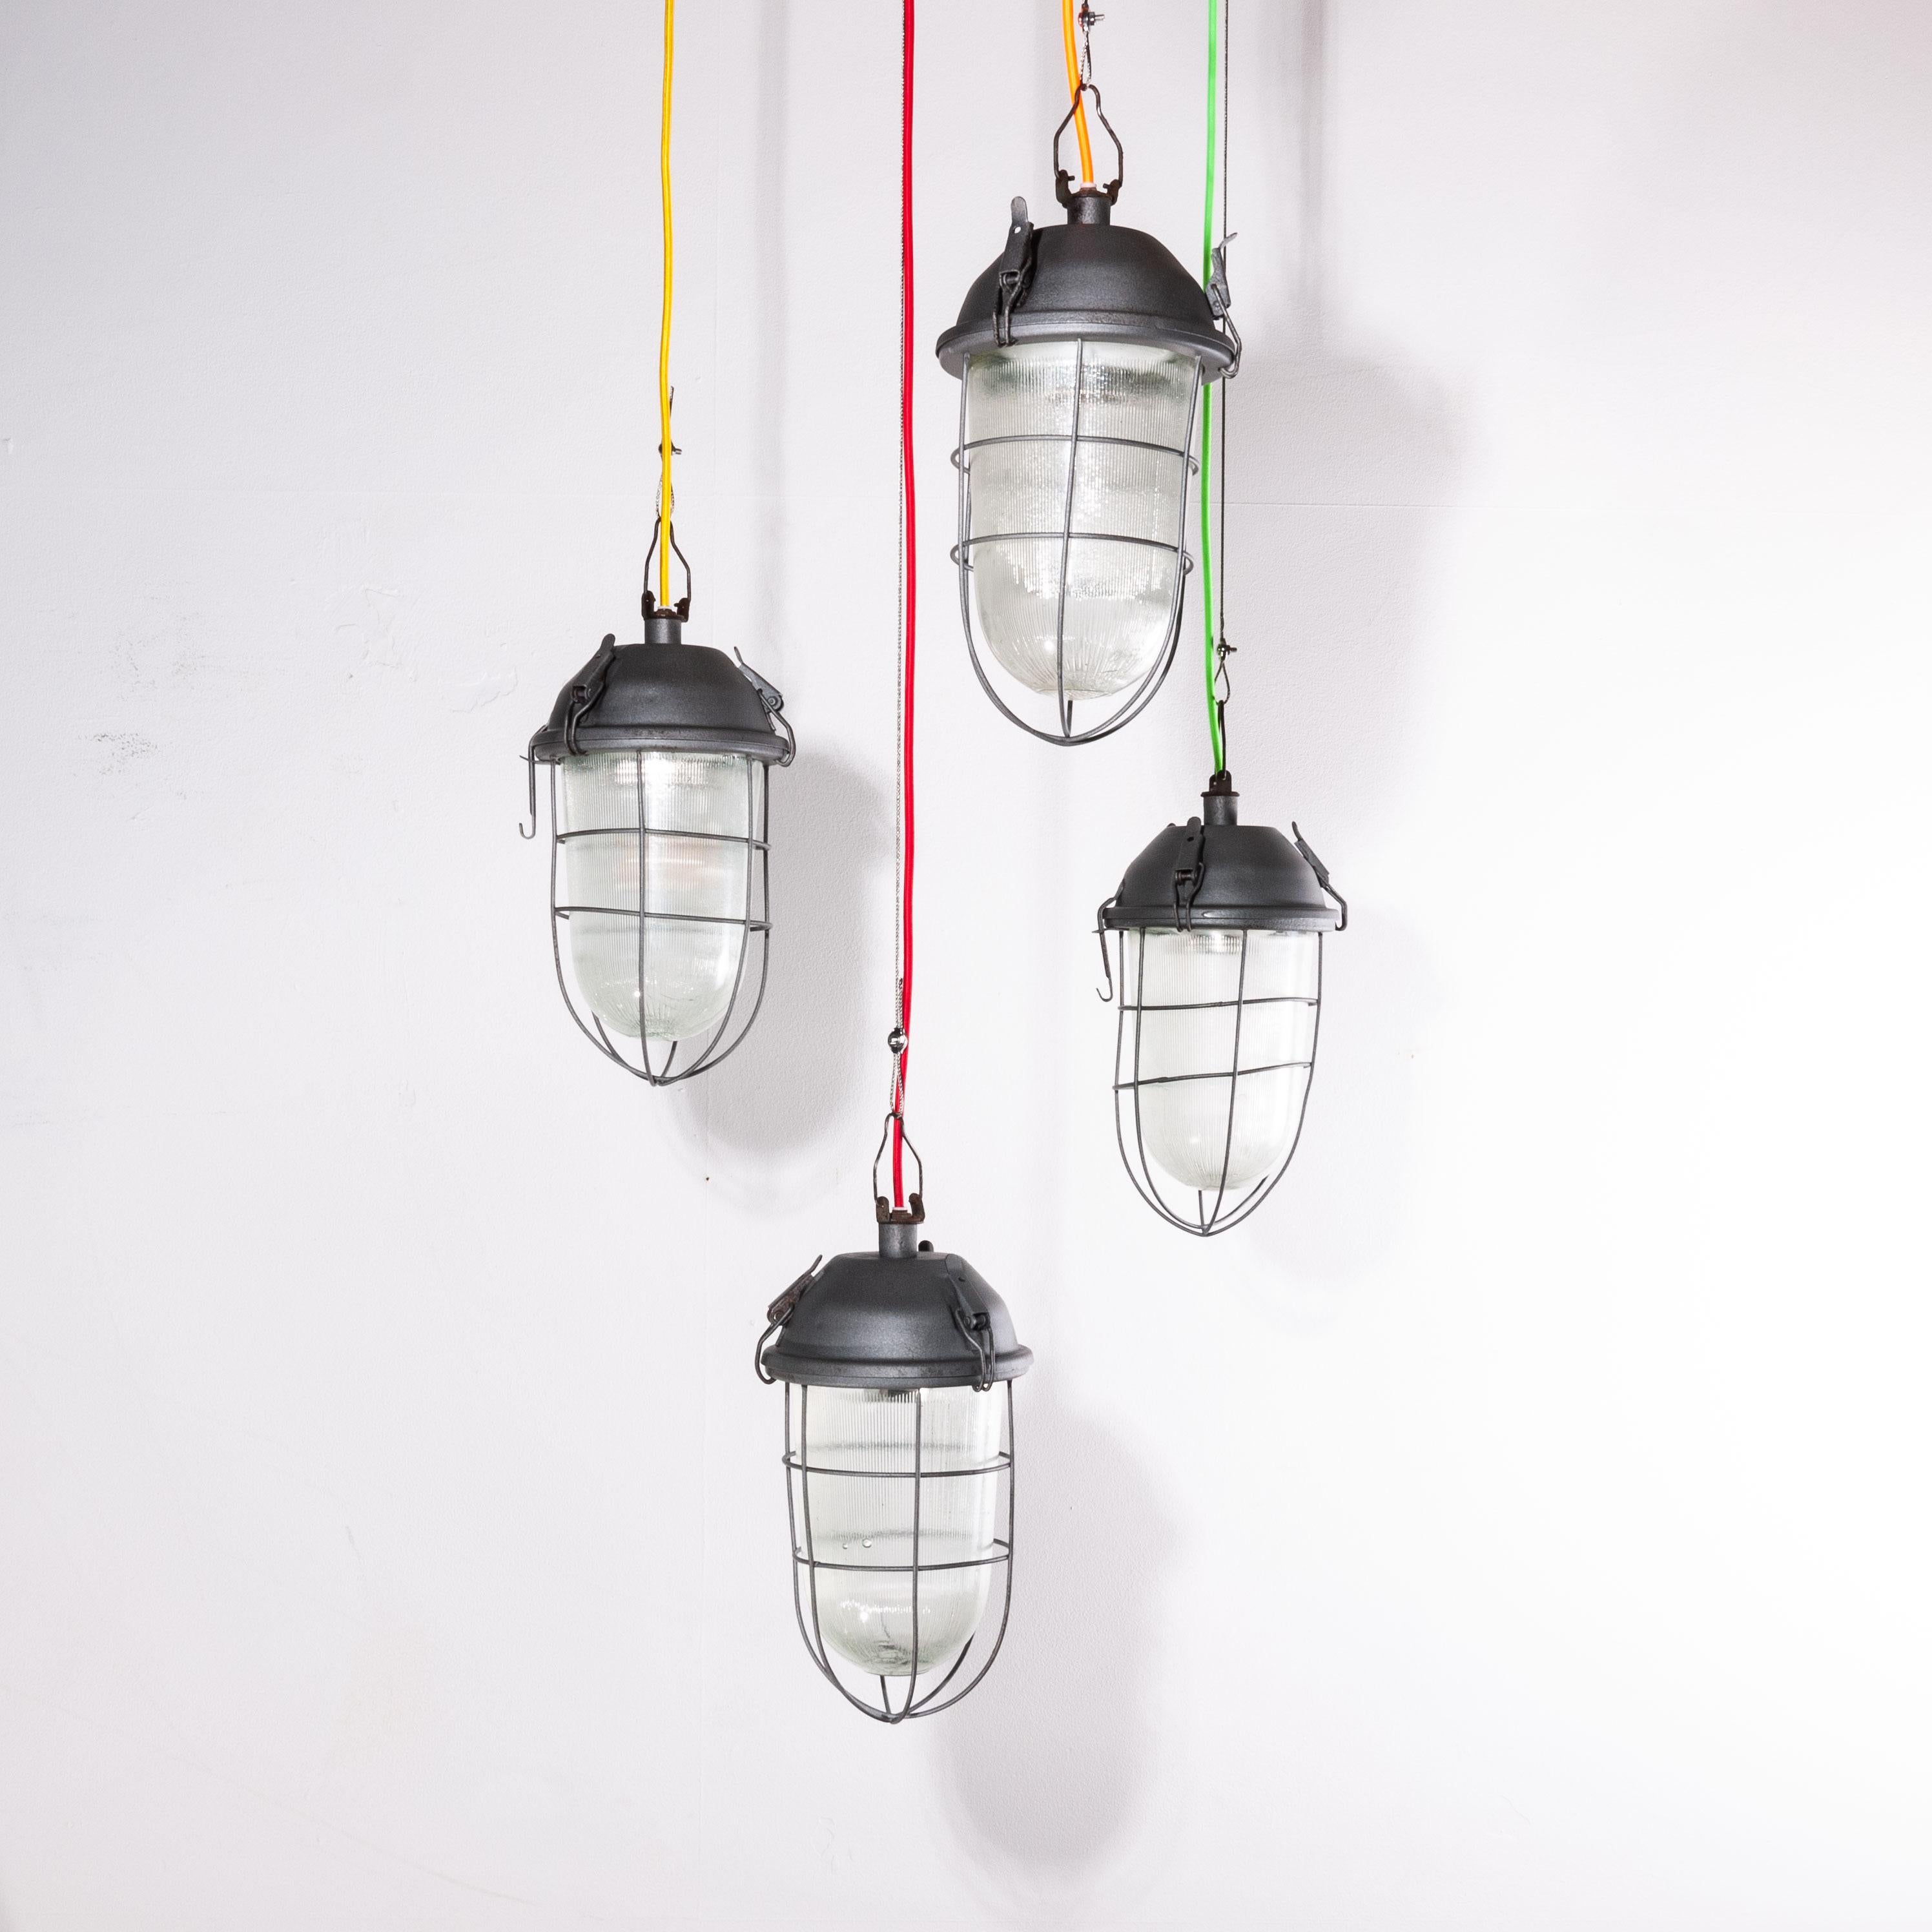 1960s Industrial Caged Hanging Ceiling Pendant Lamps/Lights with Original Glass In Good Condition For Sale In Hook, Hampshire